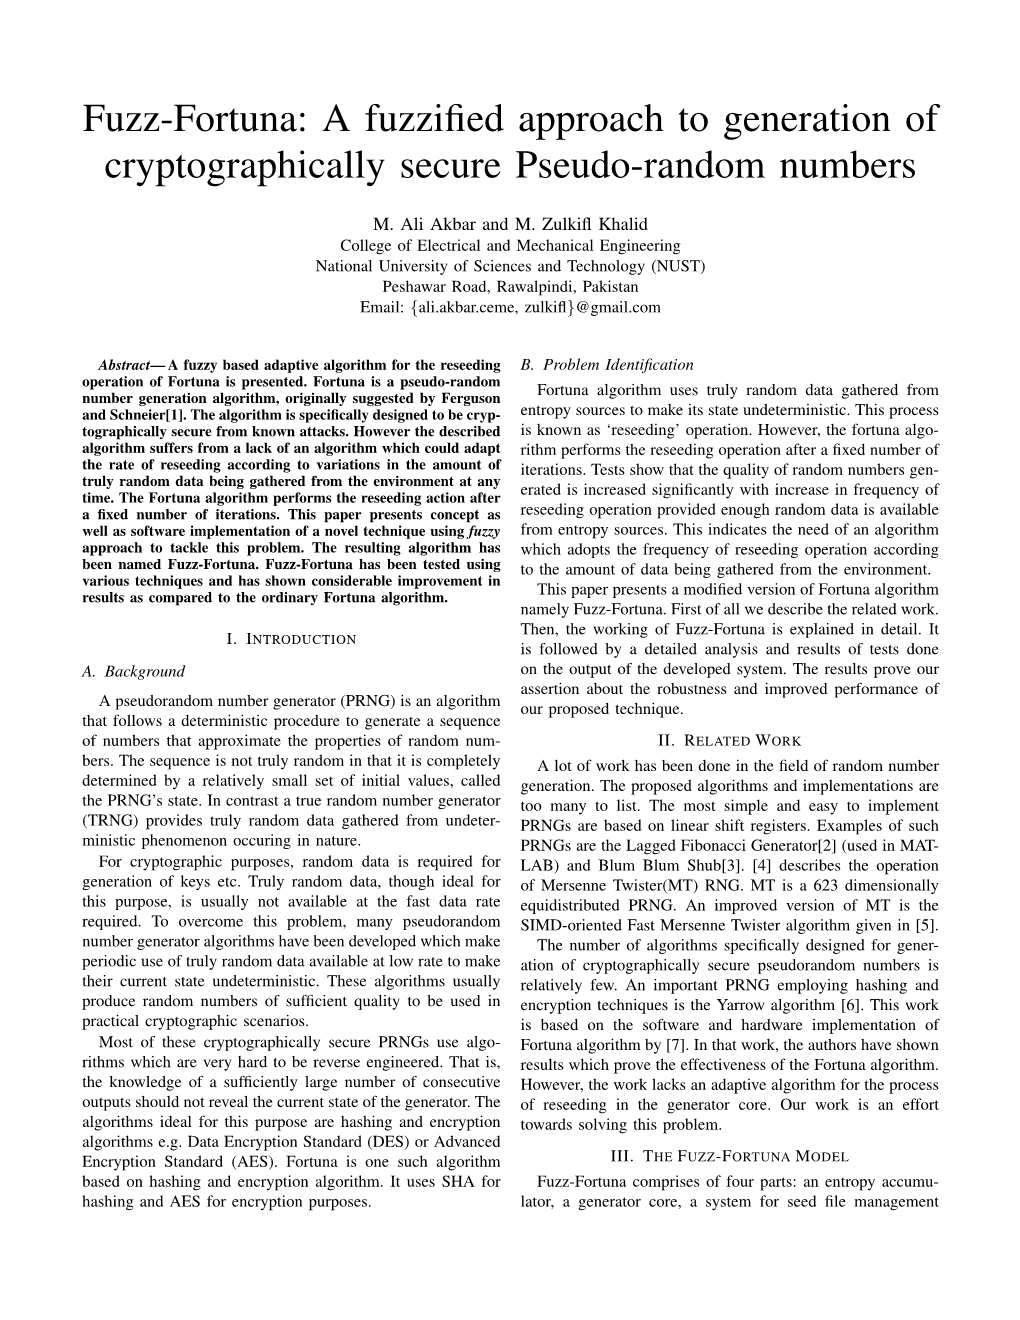 Fuzz-Fortuna: a Fuzziﬁed Approach to Generation of Cryptographically Secure Pseudo-Random Numbers